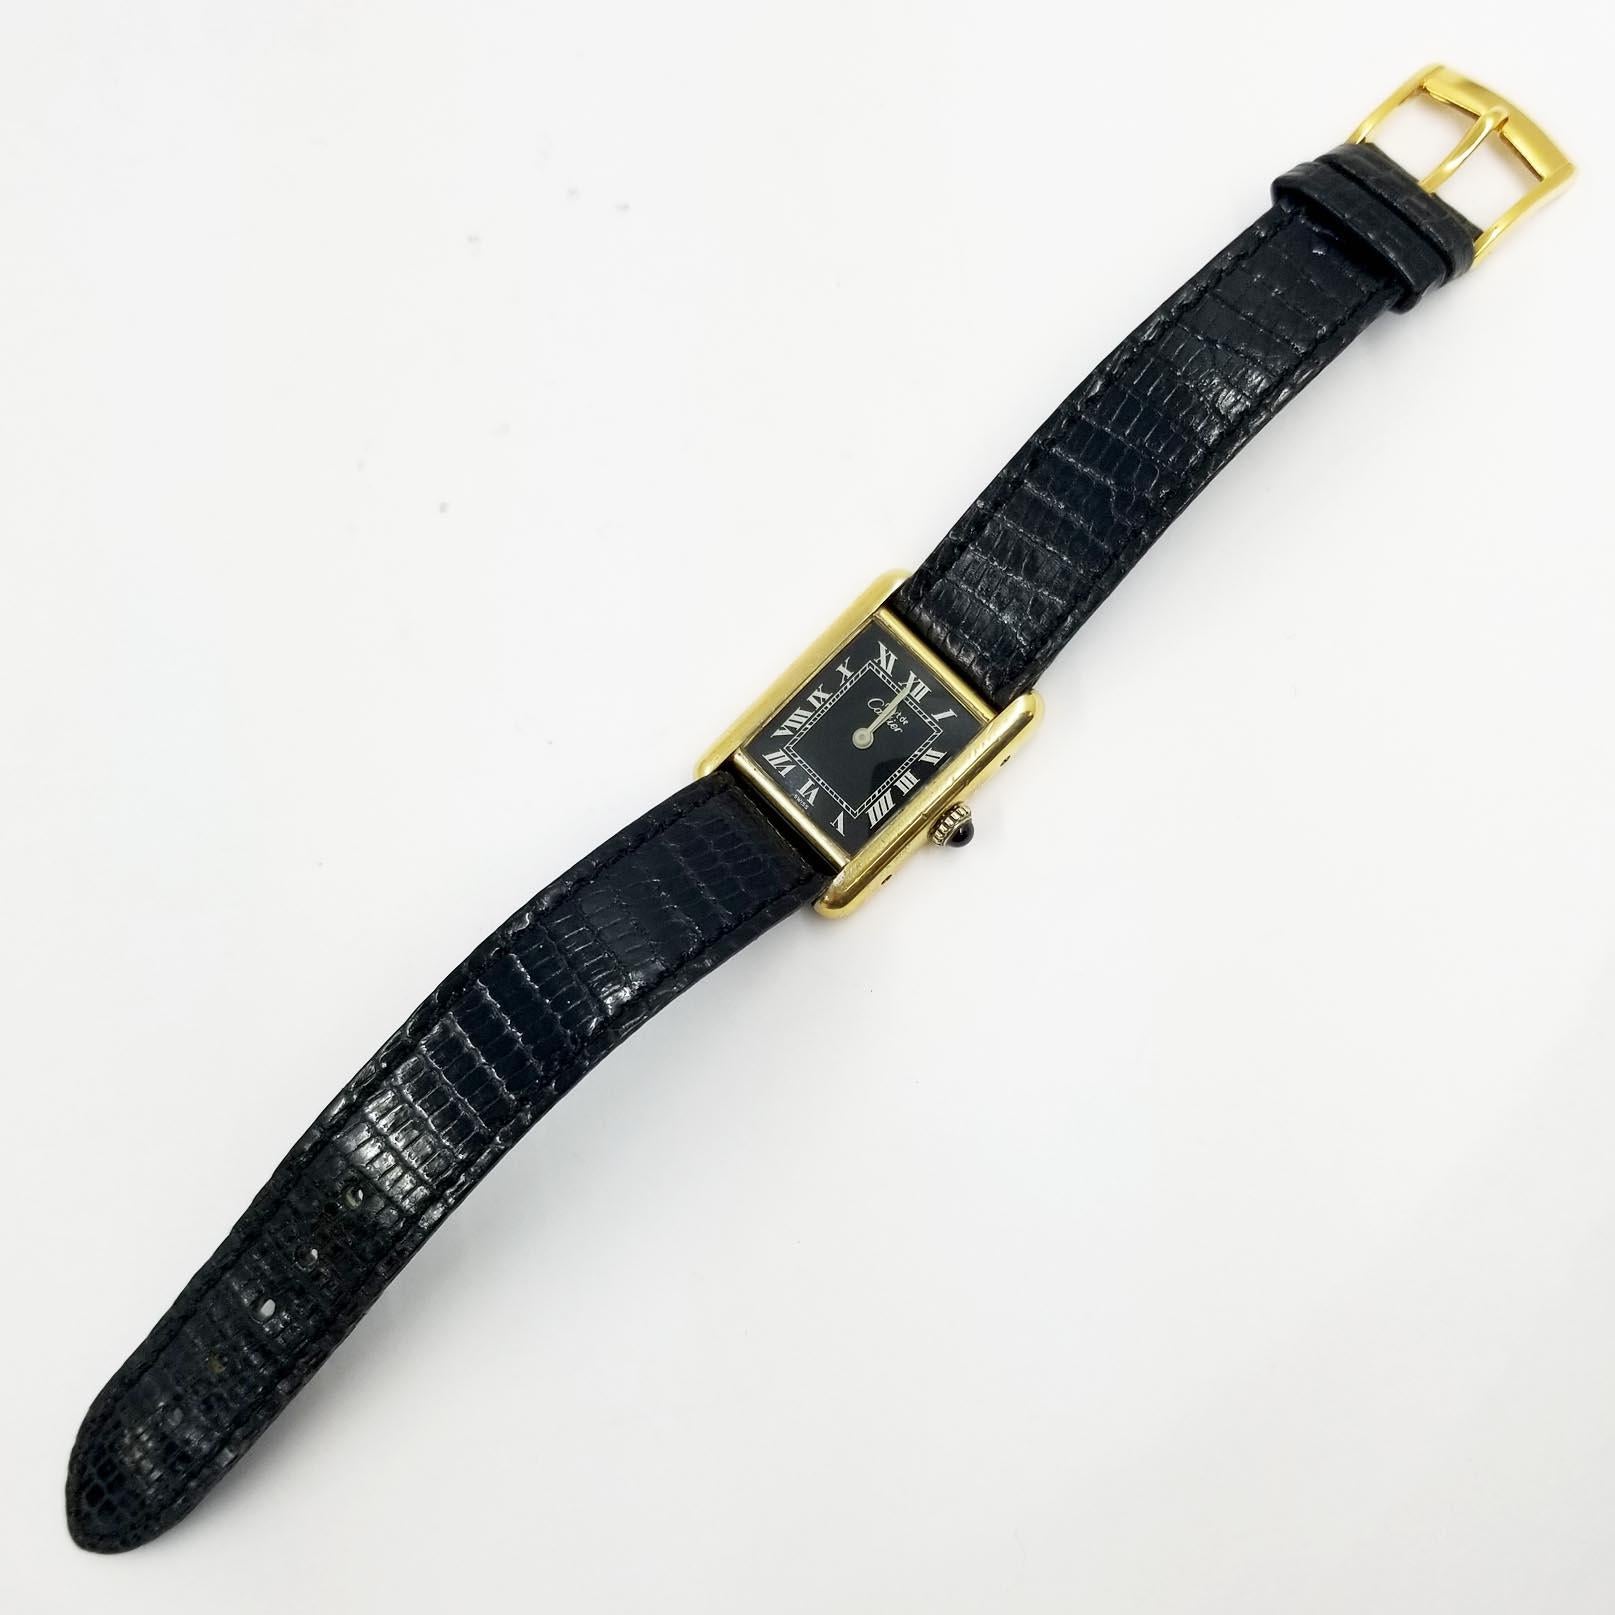 This rare vintage Cartier Tank wristwatch contains a manual wind movement. The dial is a black background with white roman numeral indicators. The strap is original, in black leather. The movement was recently serviced by a watchmaker, and comes